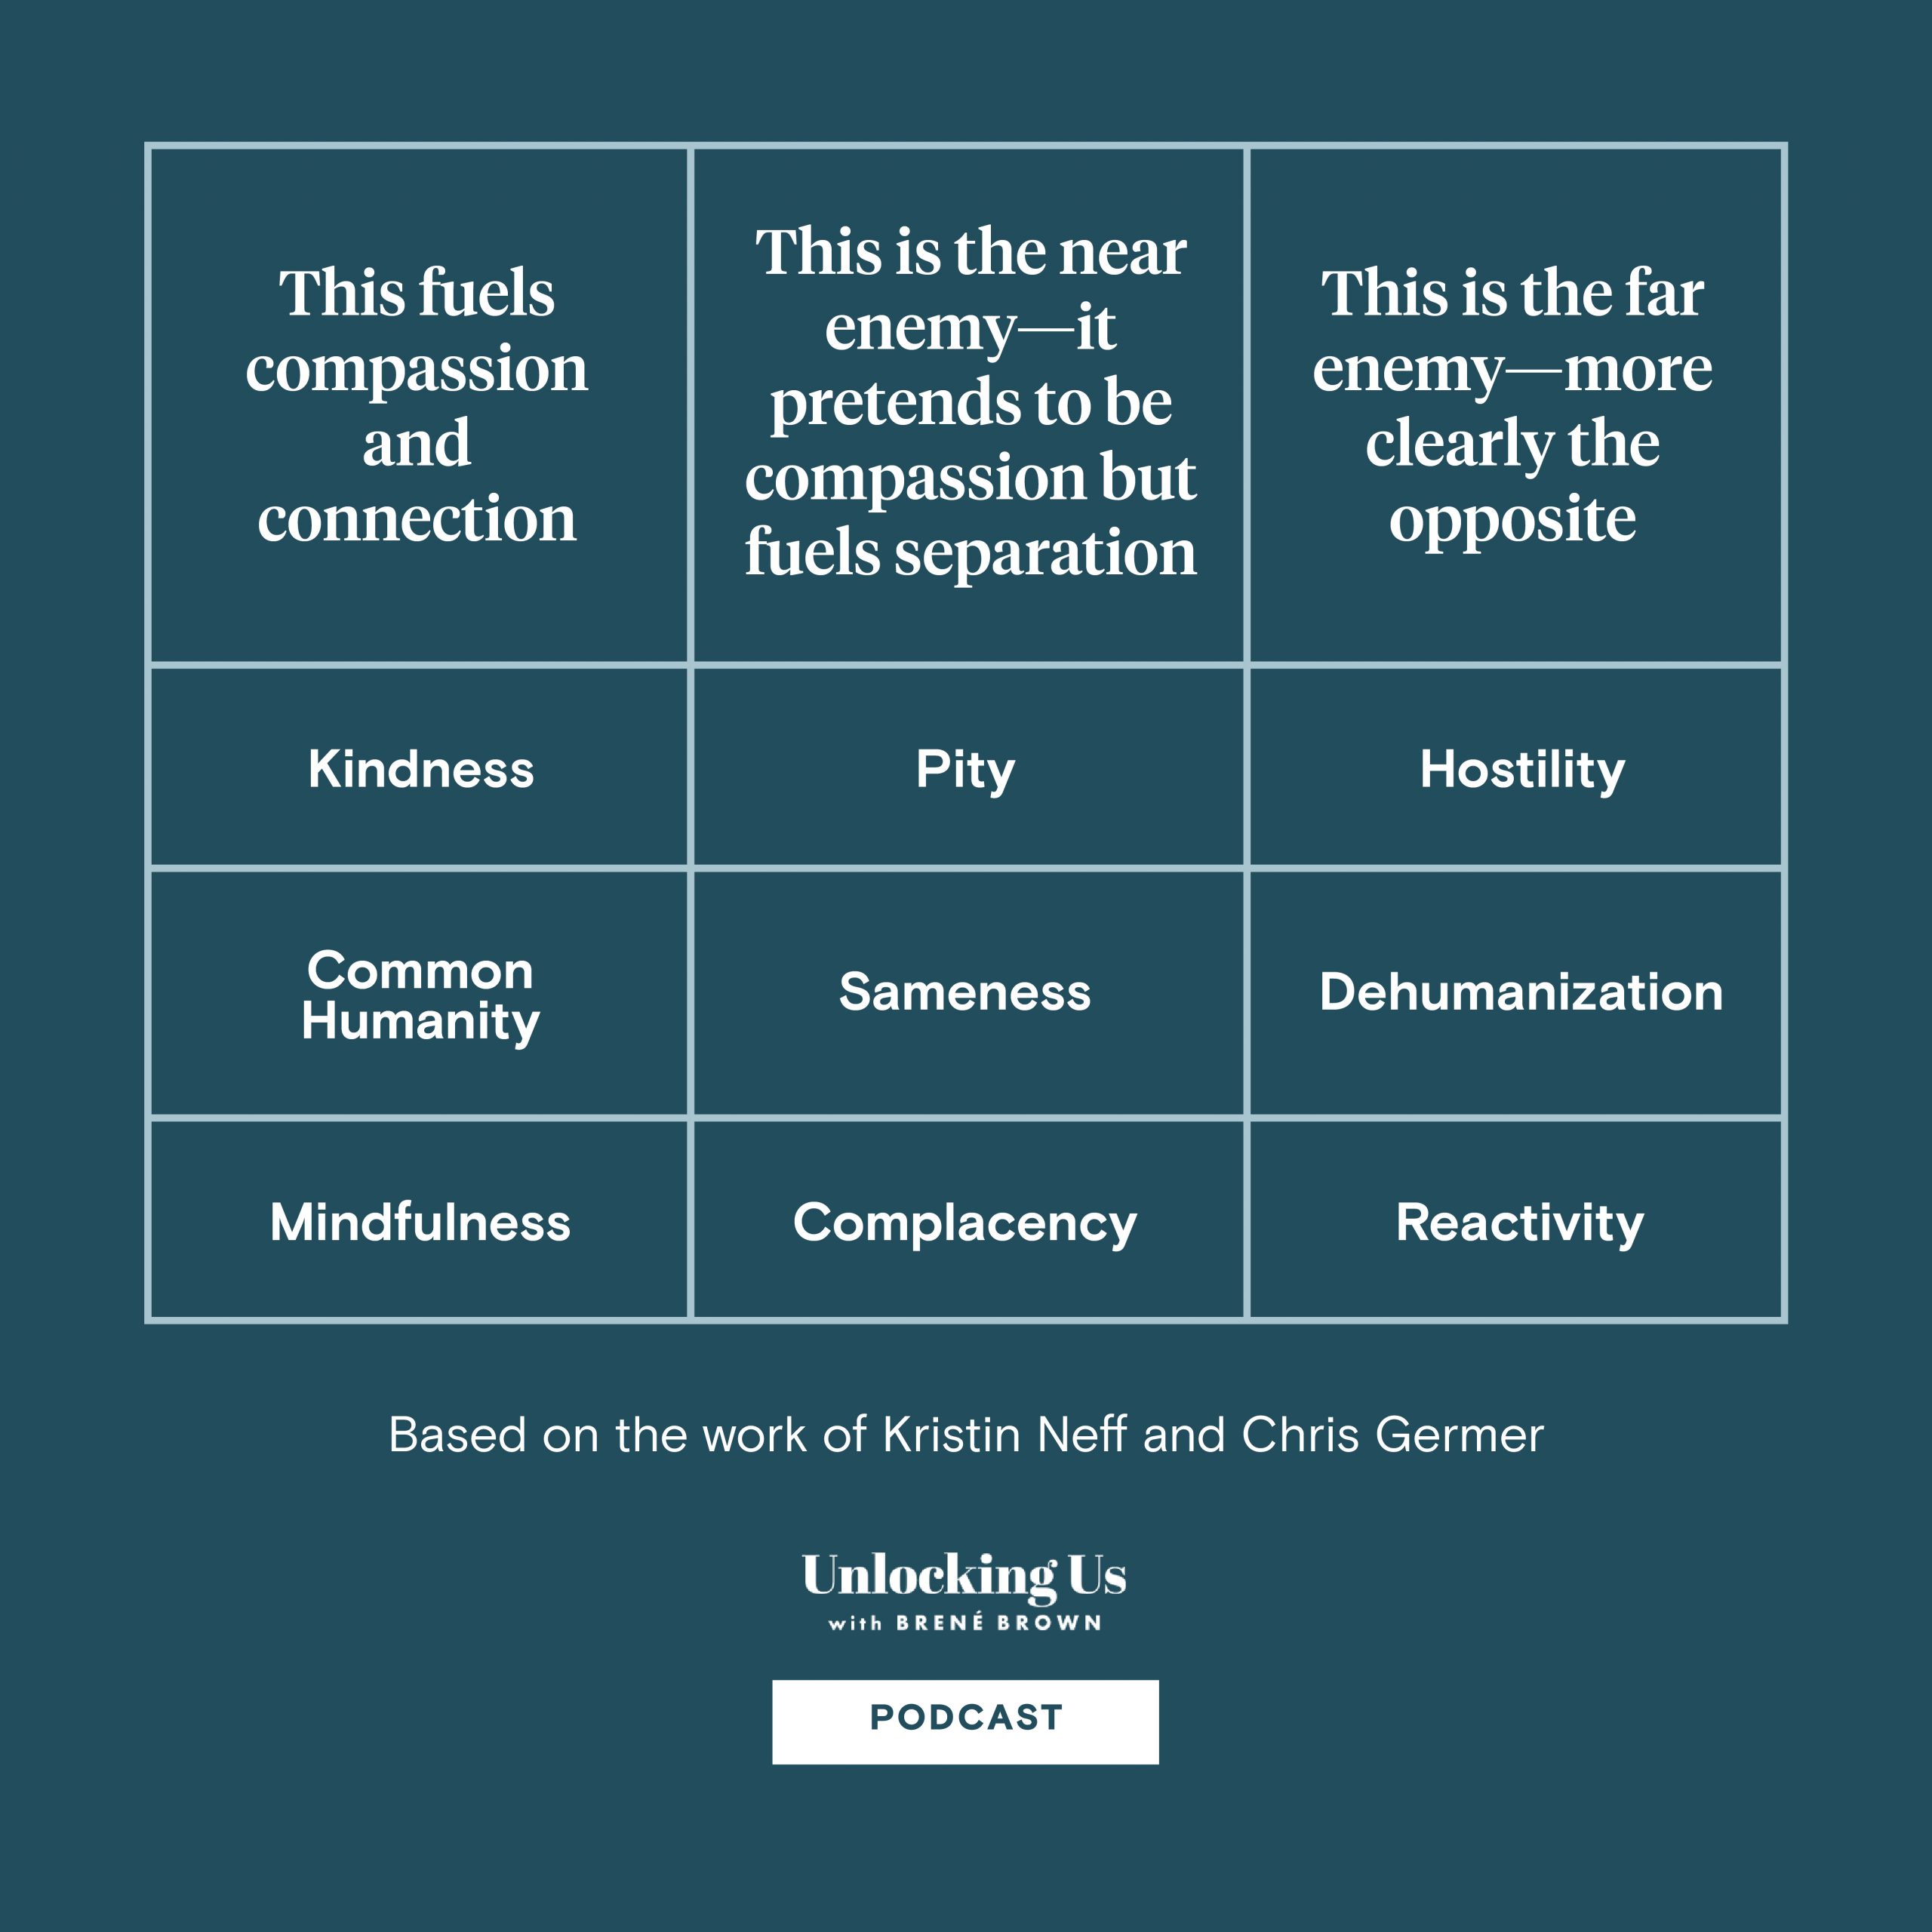 A graphic, based on the work of Kristin Neff and Chris Germer, about what fuels compassion and connection, as well the near and far enemies of those emotions.